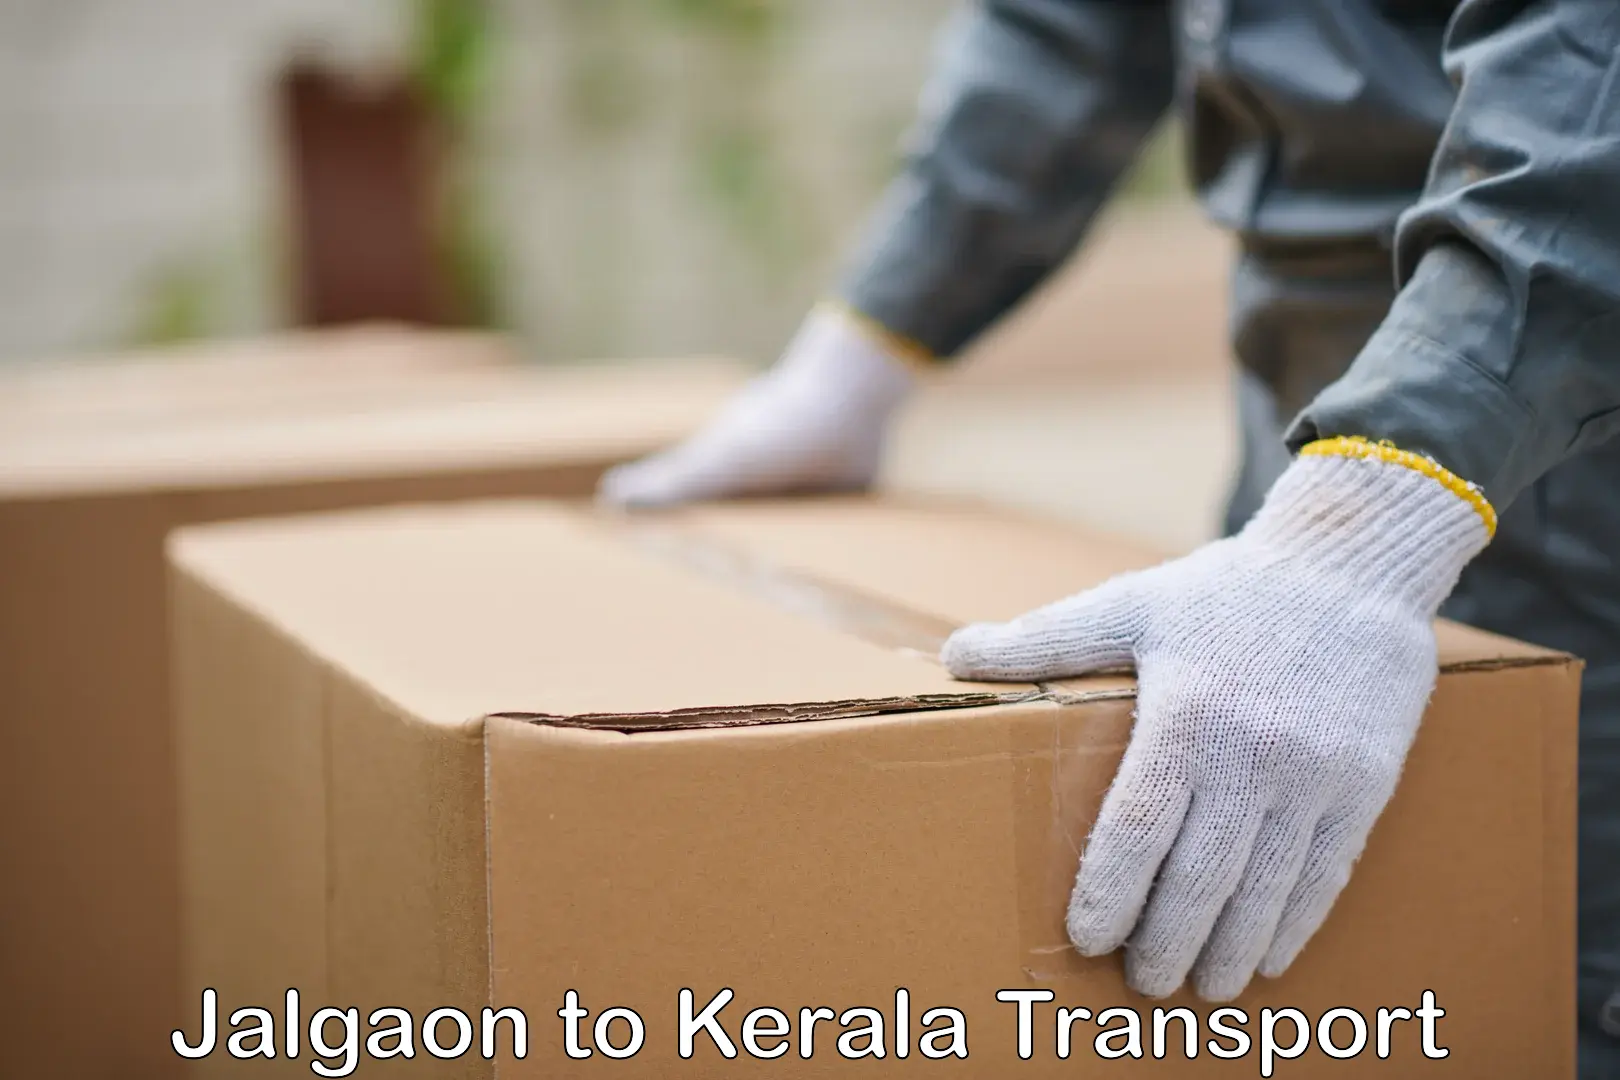 Goods delivery service Jalgaon to Kerala